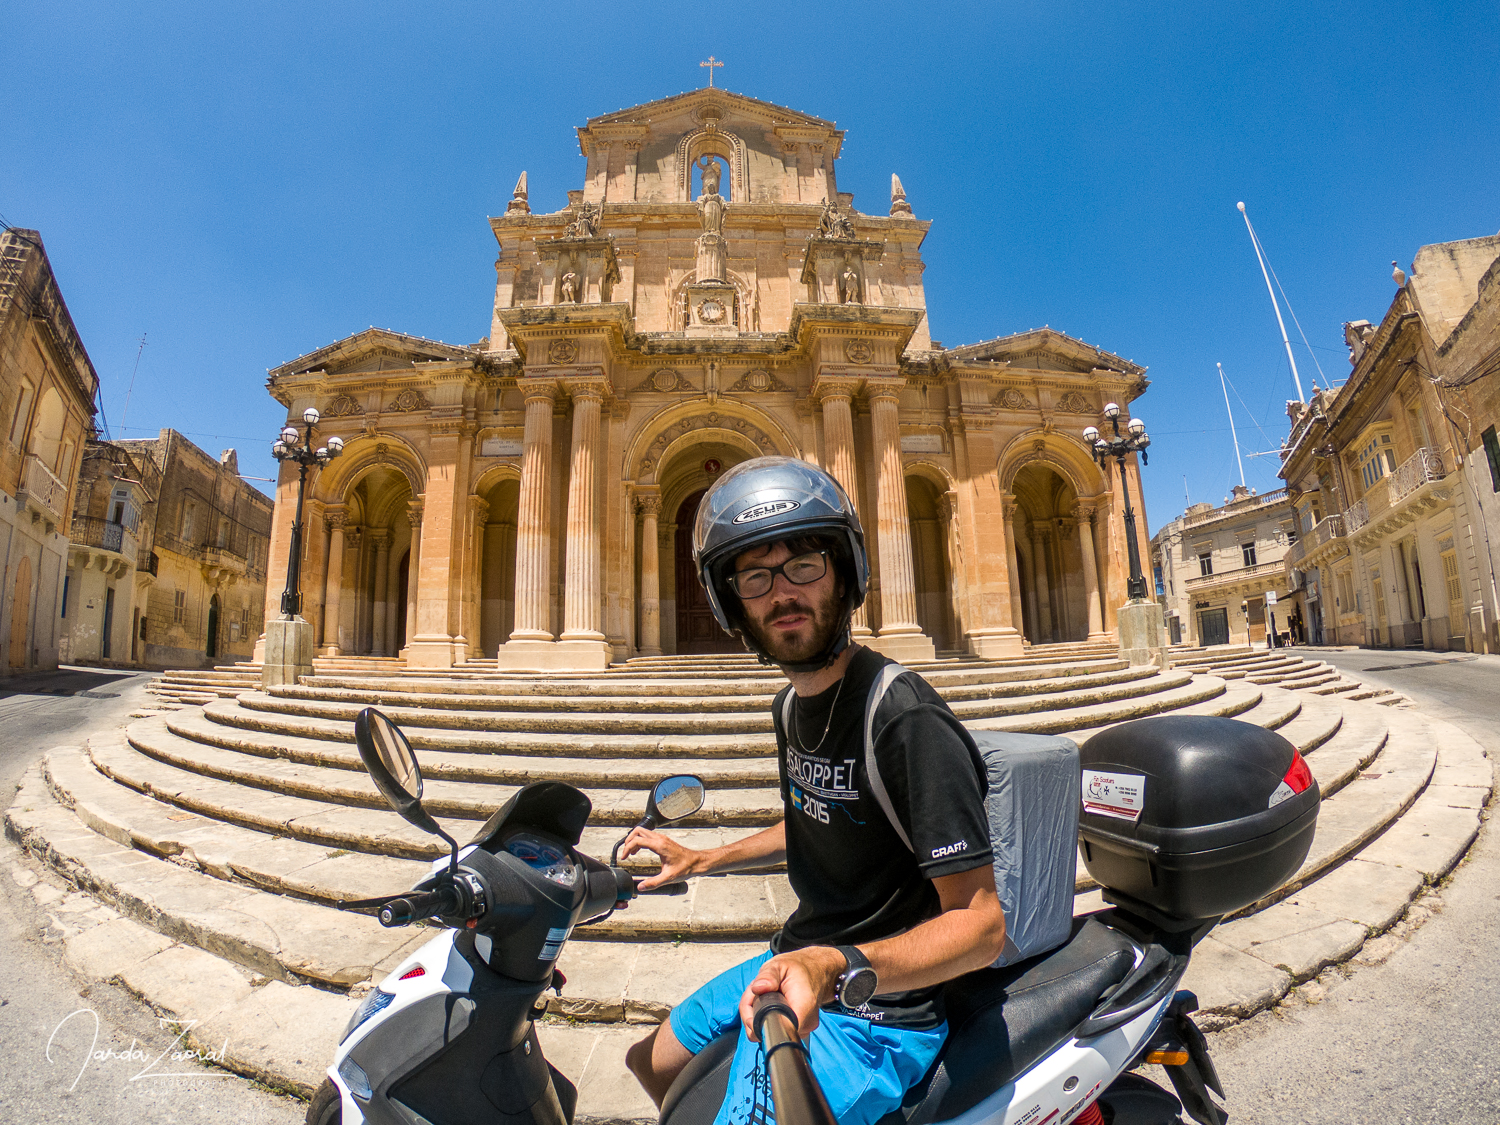 Mdina visited by a scooter